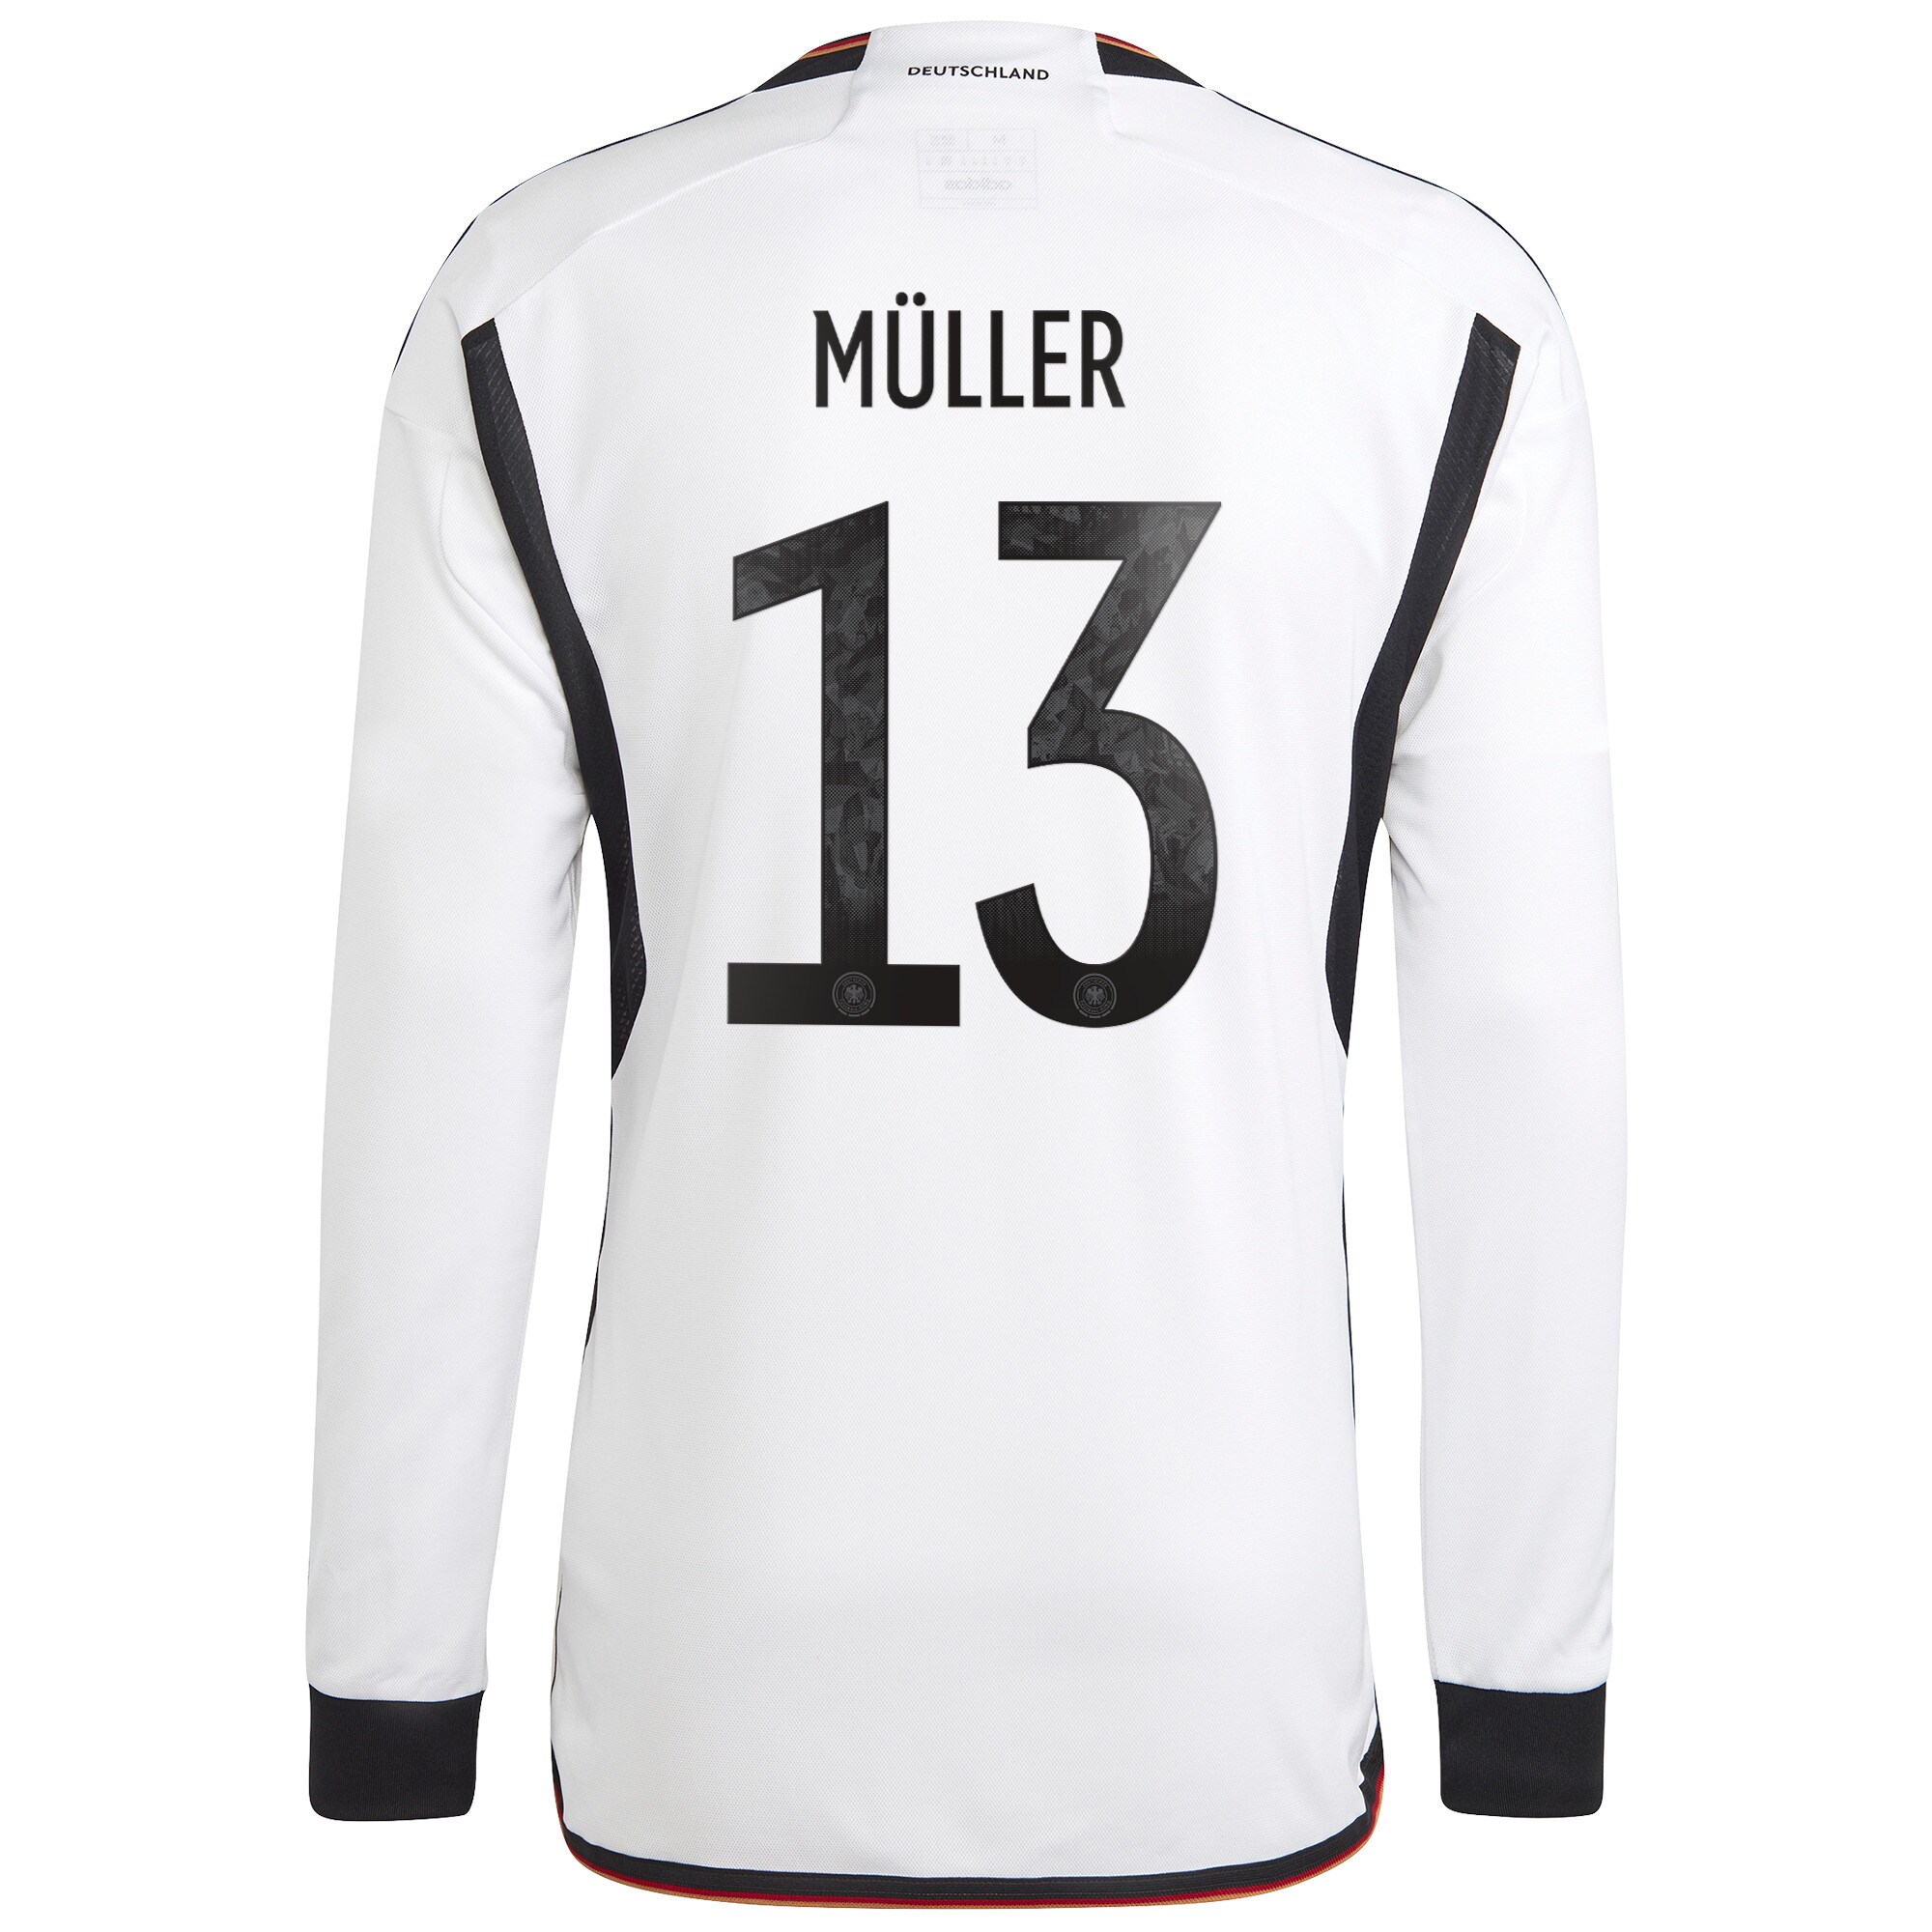 Germany Home Shirt Long Sleeve with Müller 13 printing